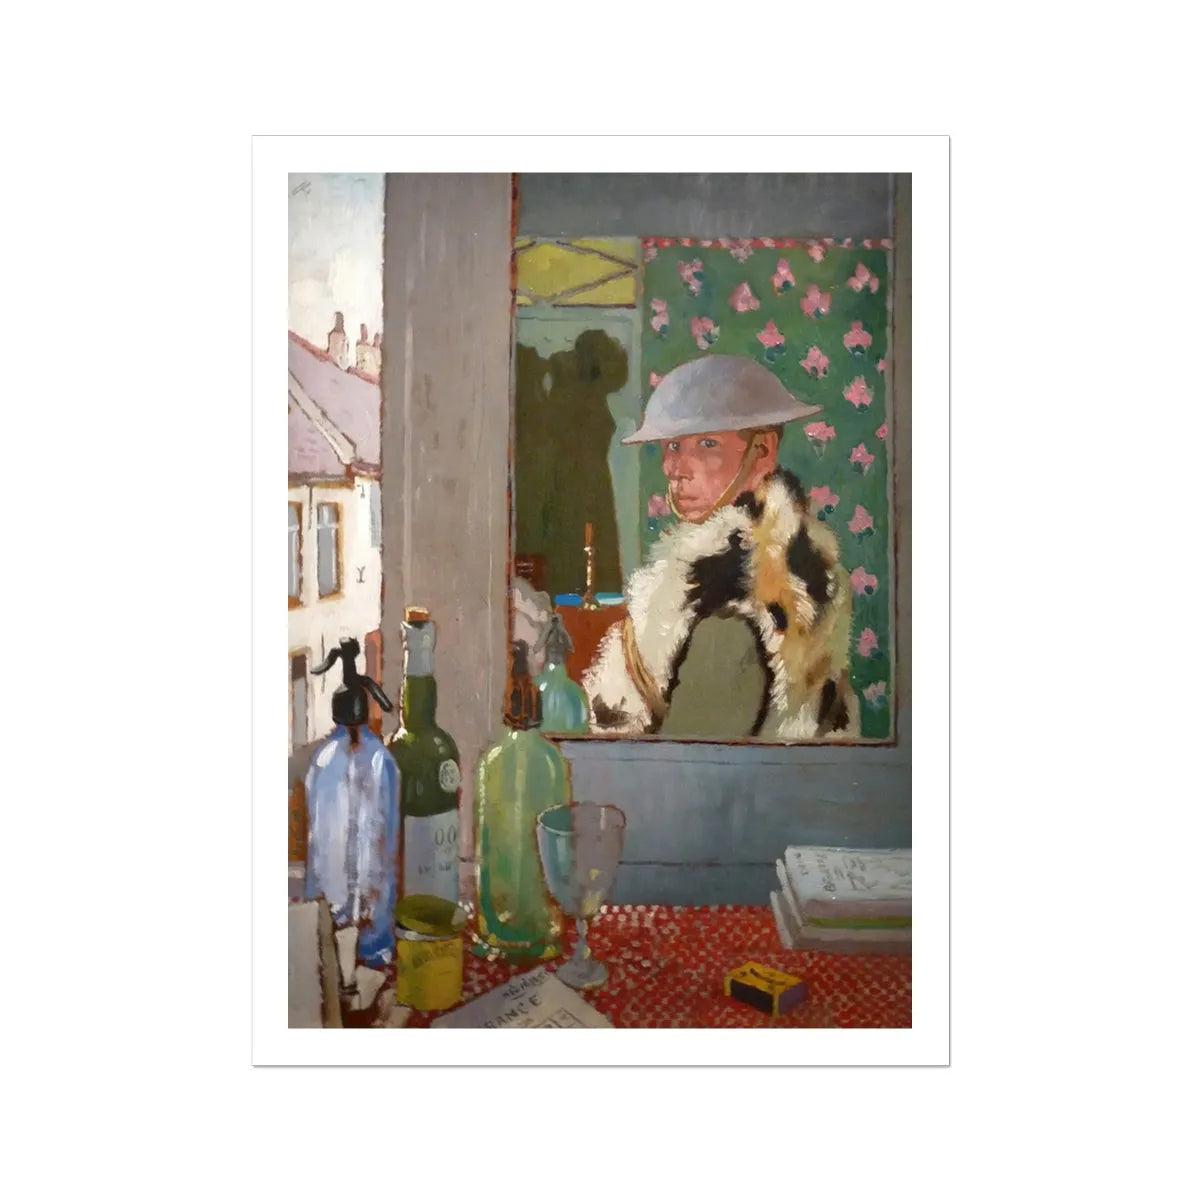 Ready To Start By William Orpen Fine Art Print - Posters Prints & Visual Artwork - Aesthetic Art